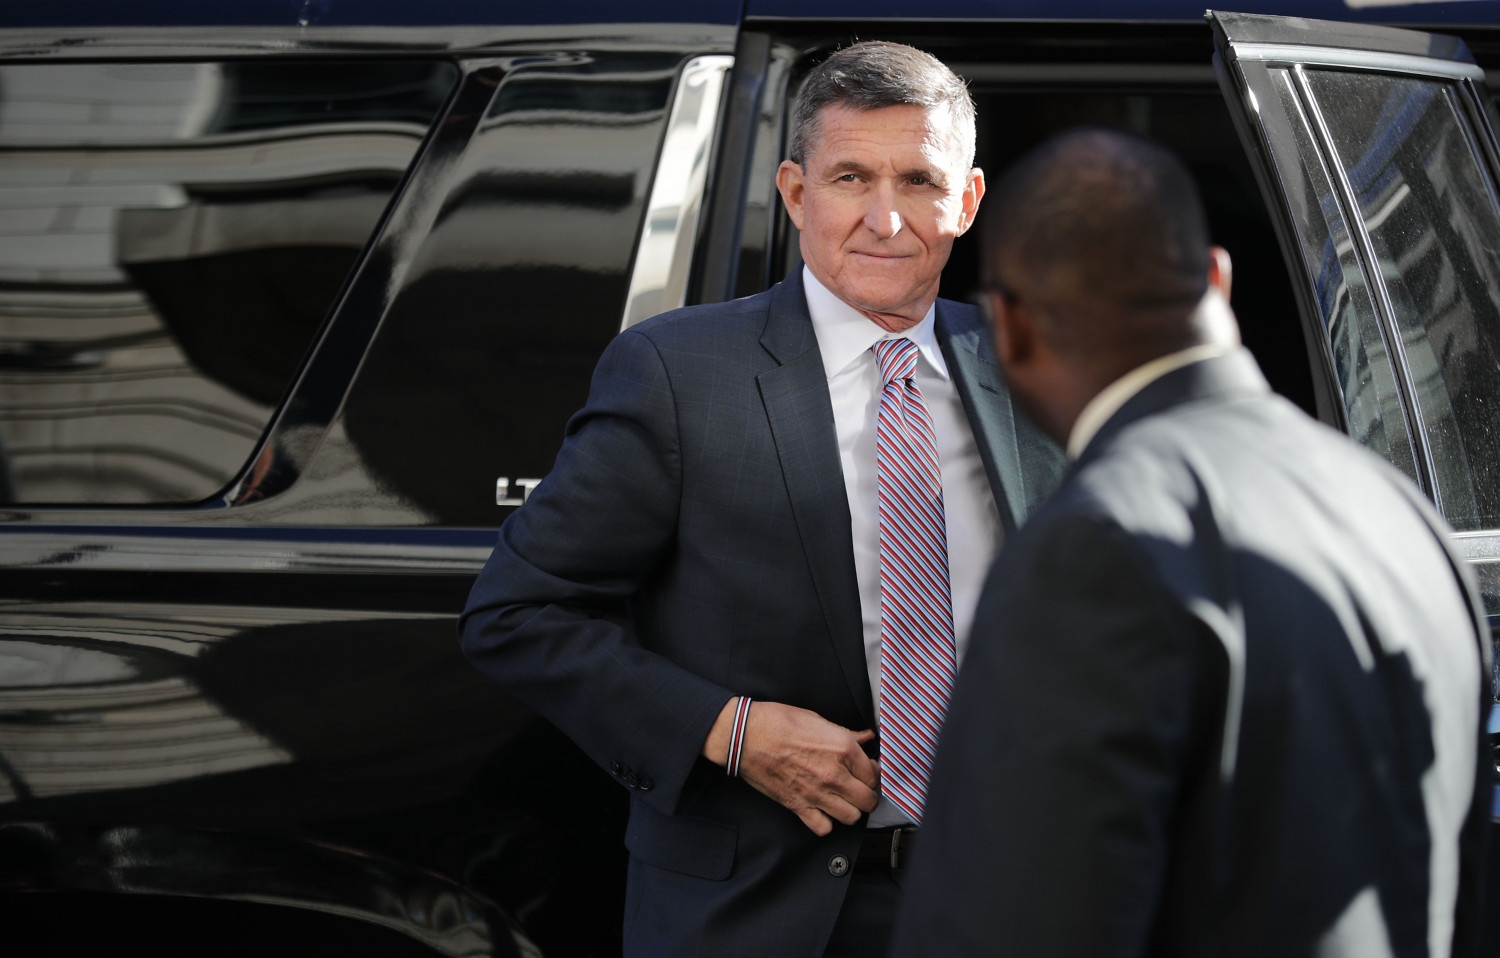 Judge Appoints ‘Amicus Curiae,’ Asks Whether Flynn Should Be Held in Contempt